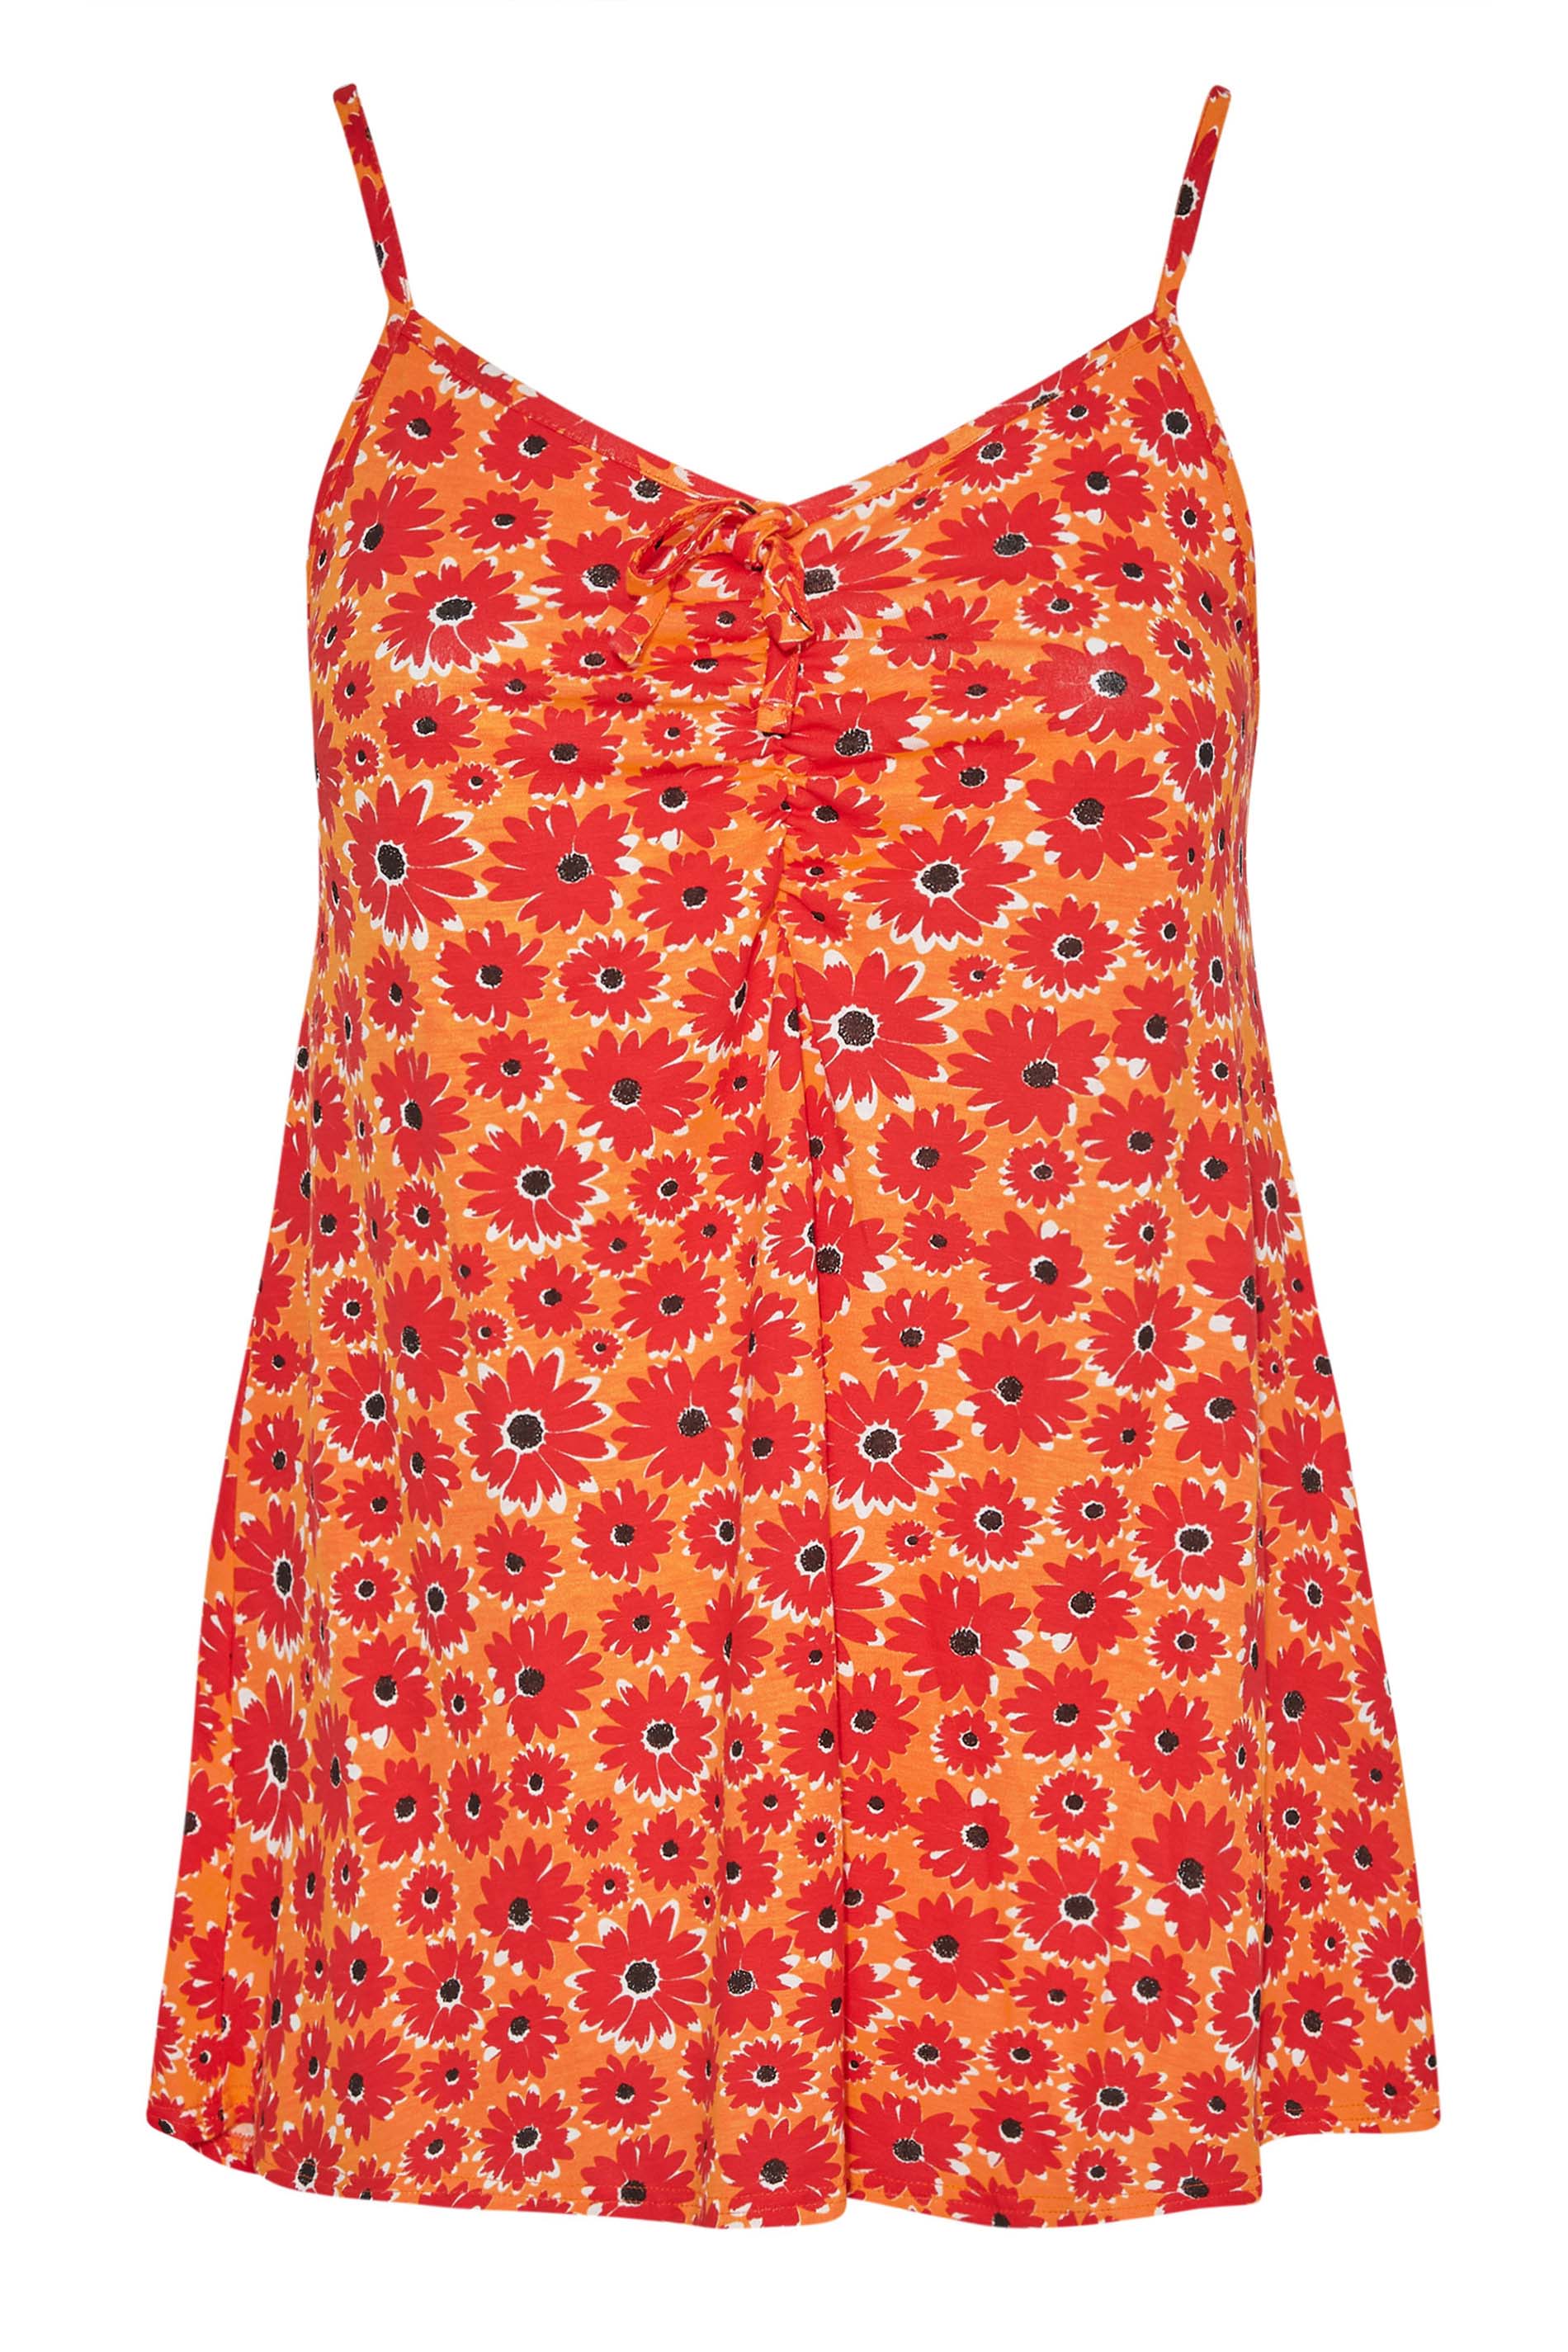 Grande taille  Tops Grande taille  Top à fleurs | LIMITED COLLECTION Curve Orange Floral Print Ruched Swing Cami Top - WW68080